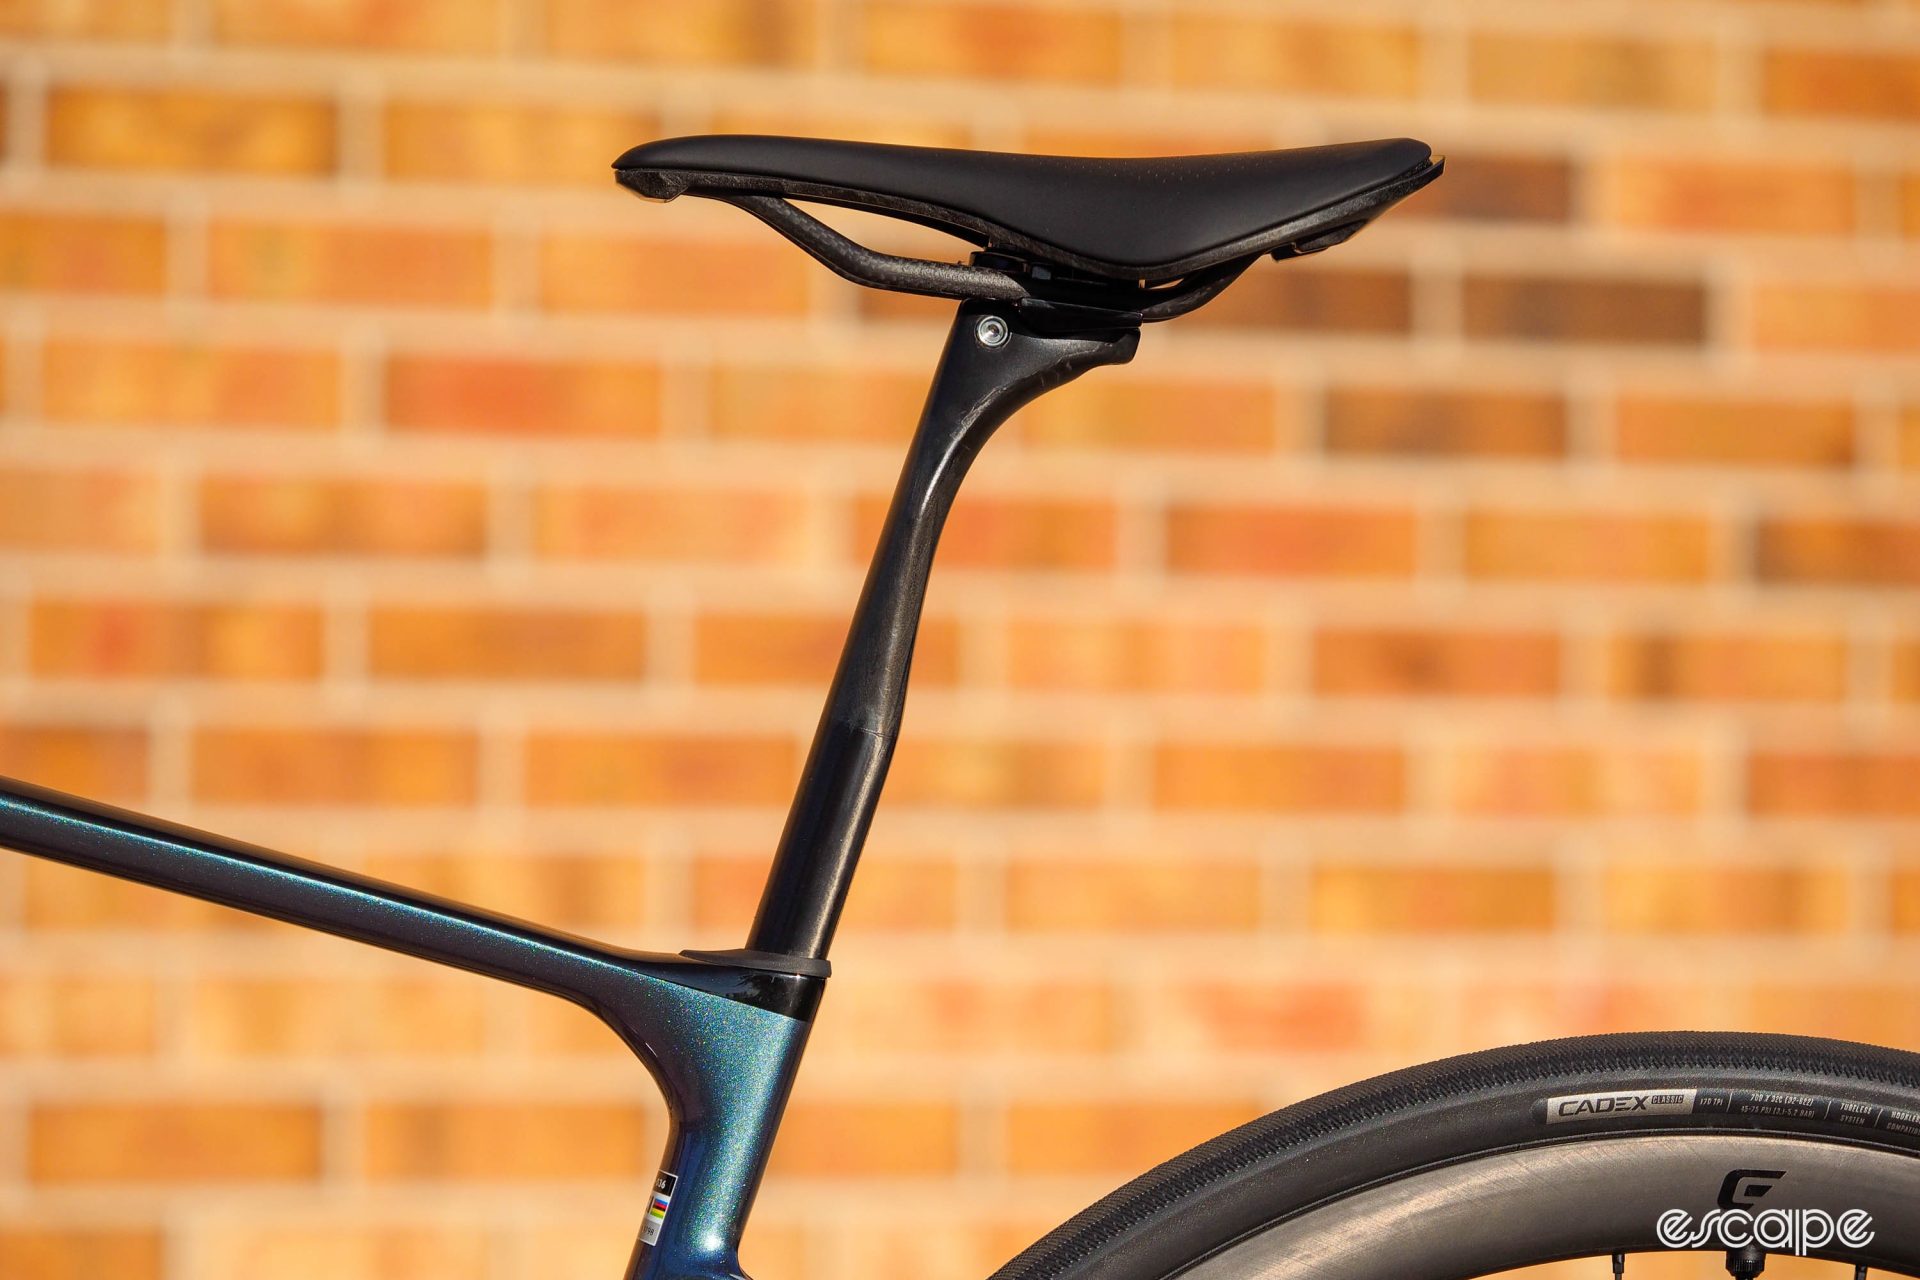 The D-Fuse seatpost on the 2024 Giant Defy Advanced features a D-shape profile and slightly scalloped top section below the seat clamp for flex.